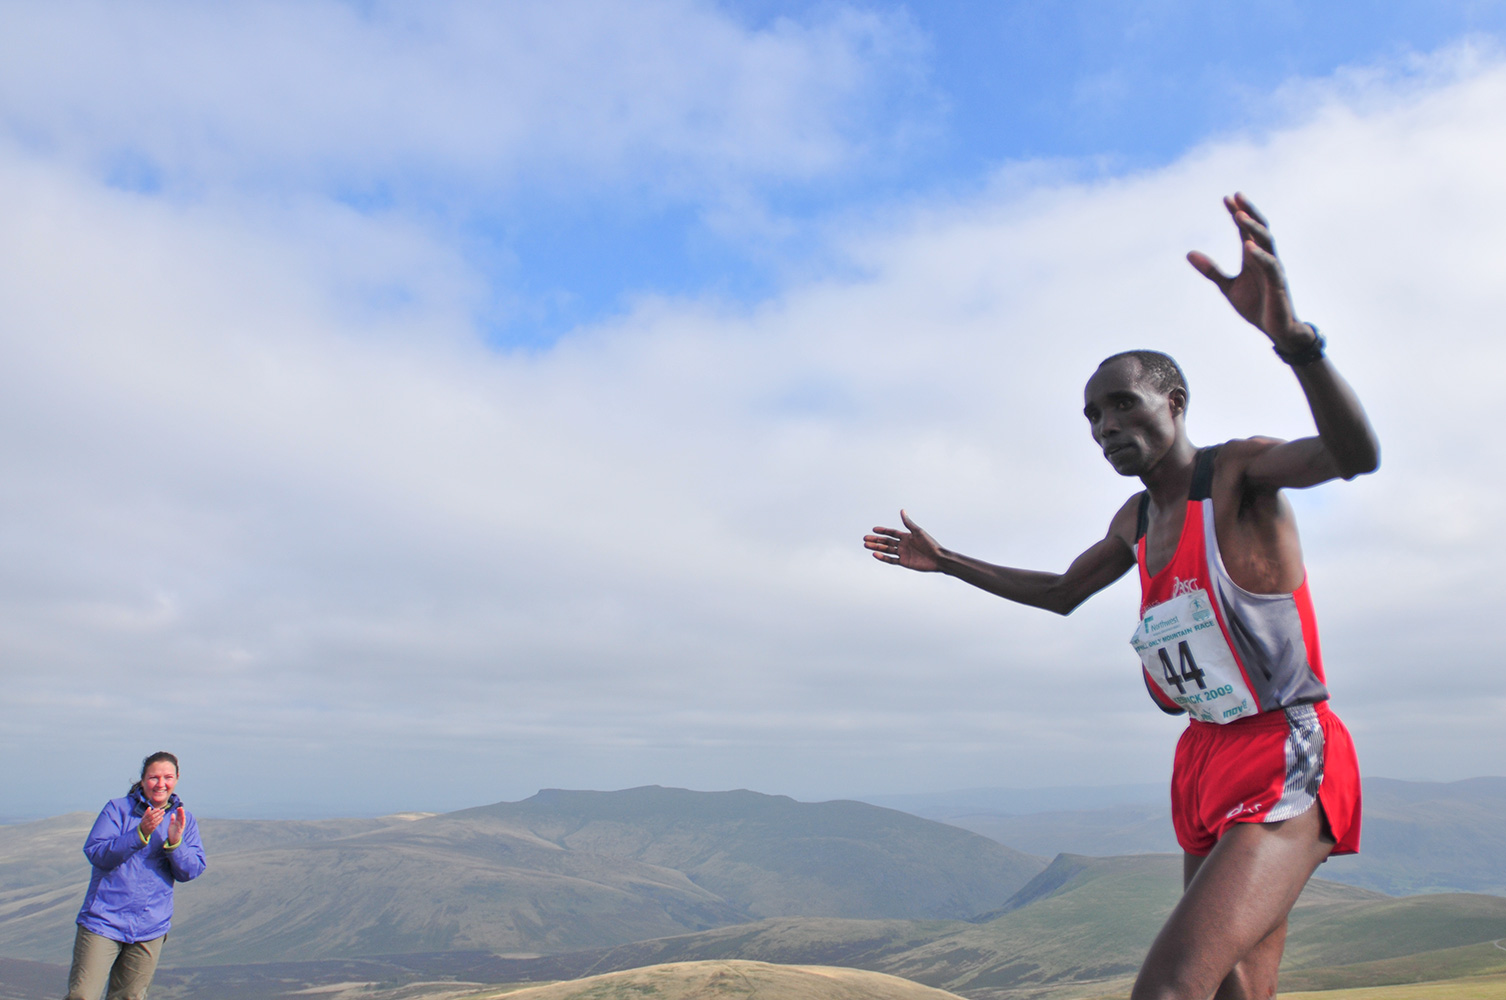 Keswick, Cumbria, September 2009Wilson Chemweno of Kenya crossing the line to win a gold medal in the Men's Up-hill Race on the summit of Skiddaw